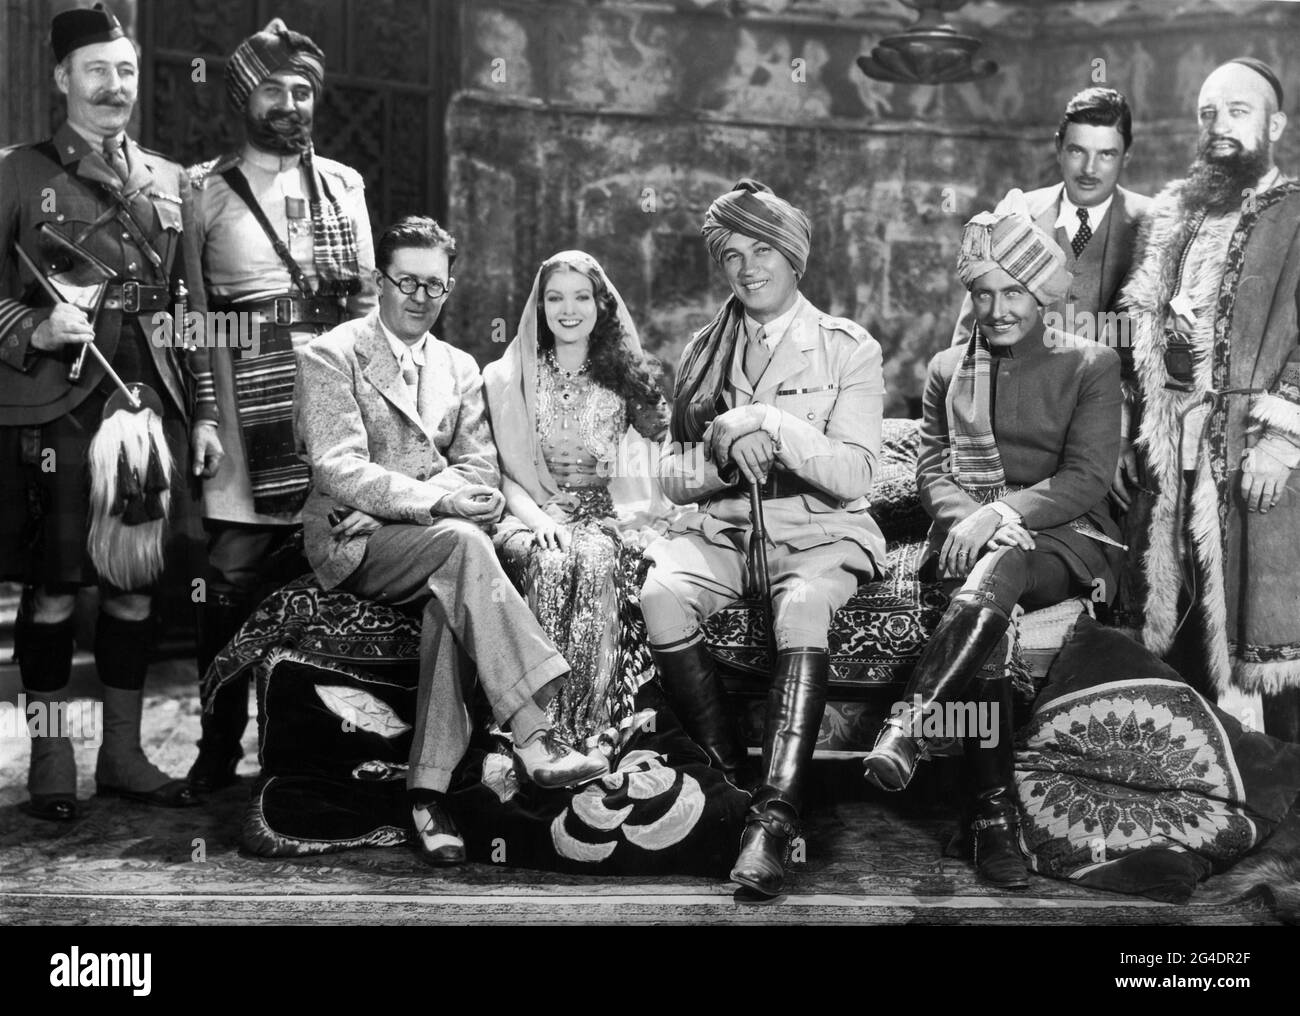 LUMSDEN HARE possibly MITCHELL LEWIS Director JOHN FORD MYRNA LOY VICTOR McLAGLEN ROY D'ARCY Assistant Director WINGATE SMITH and WALTER LONG on set candid group photo taken during filming of THE BLACK WATCH 1929 director JOHN FORD from novel King of the Khyber Rifles by Talbot Mundy Fox Film Corporation Stock Photo